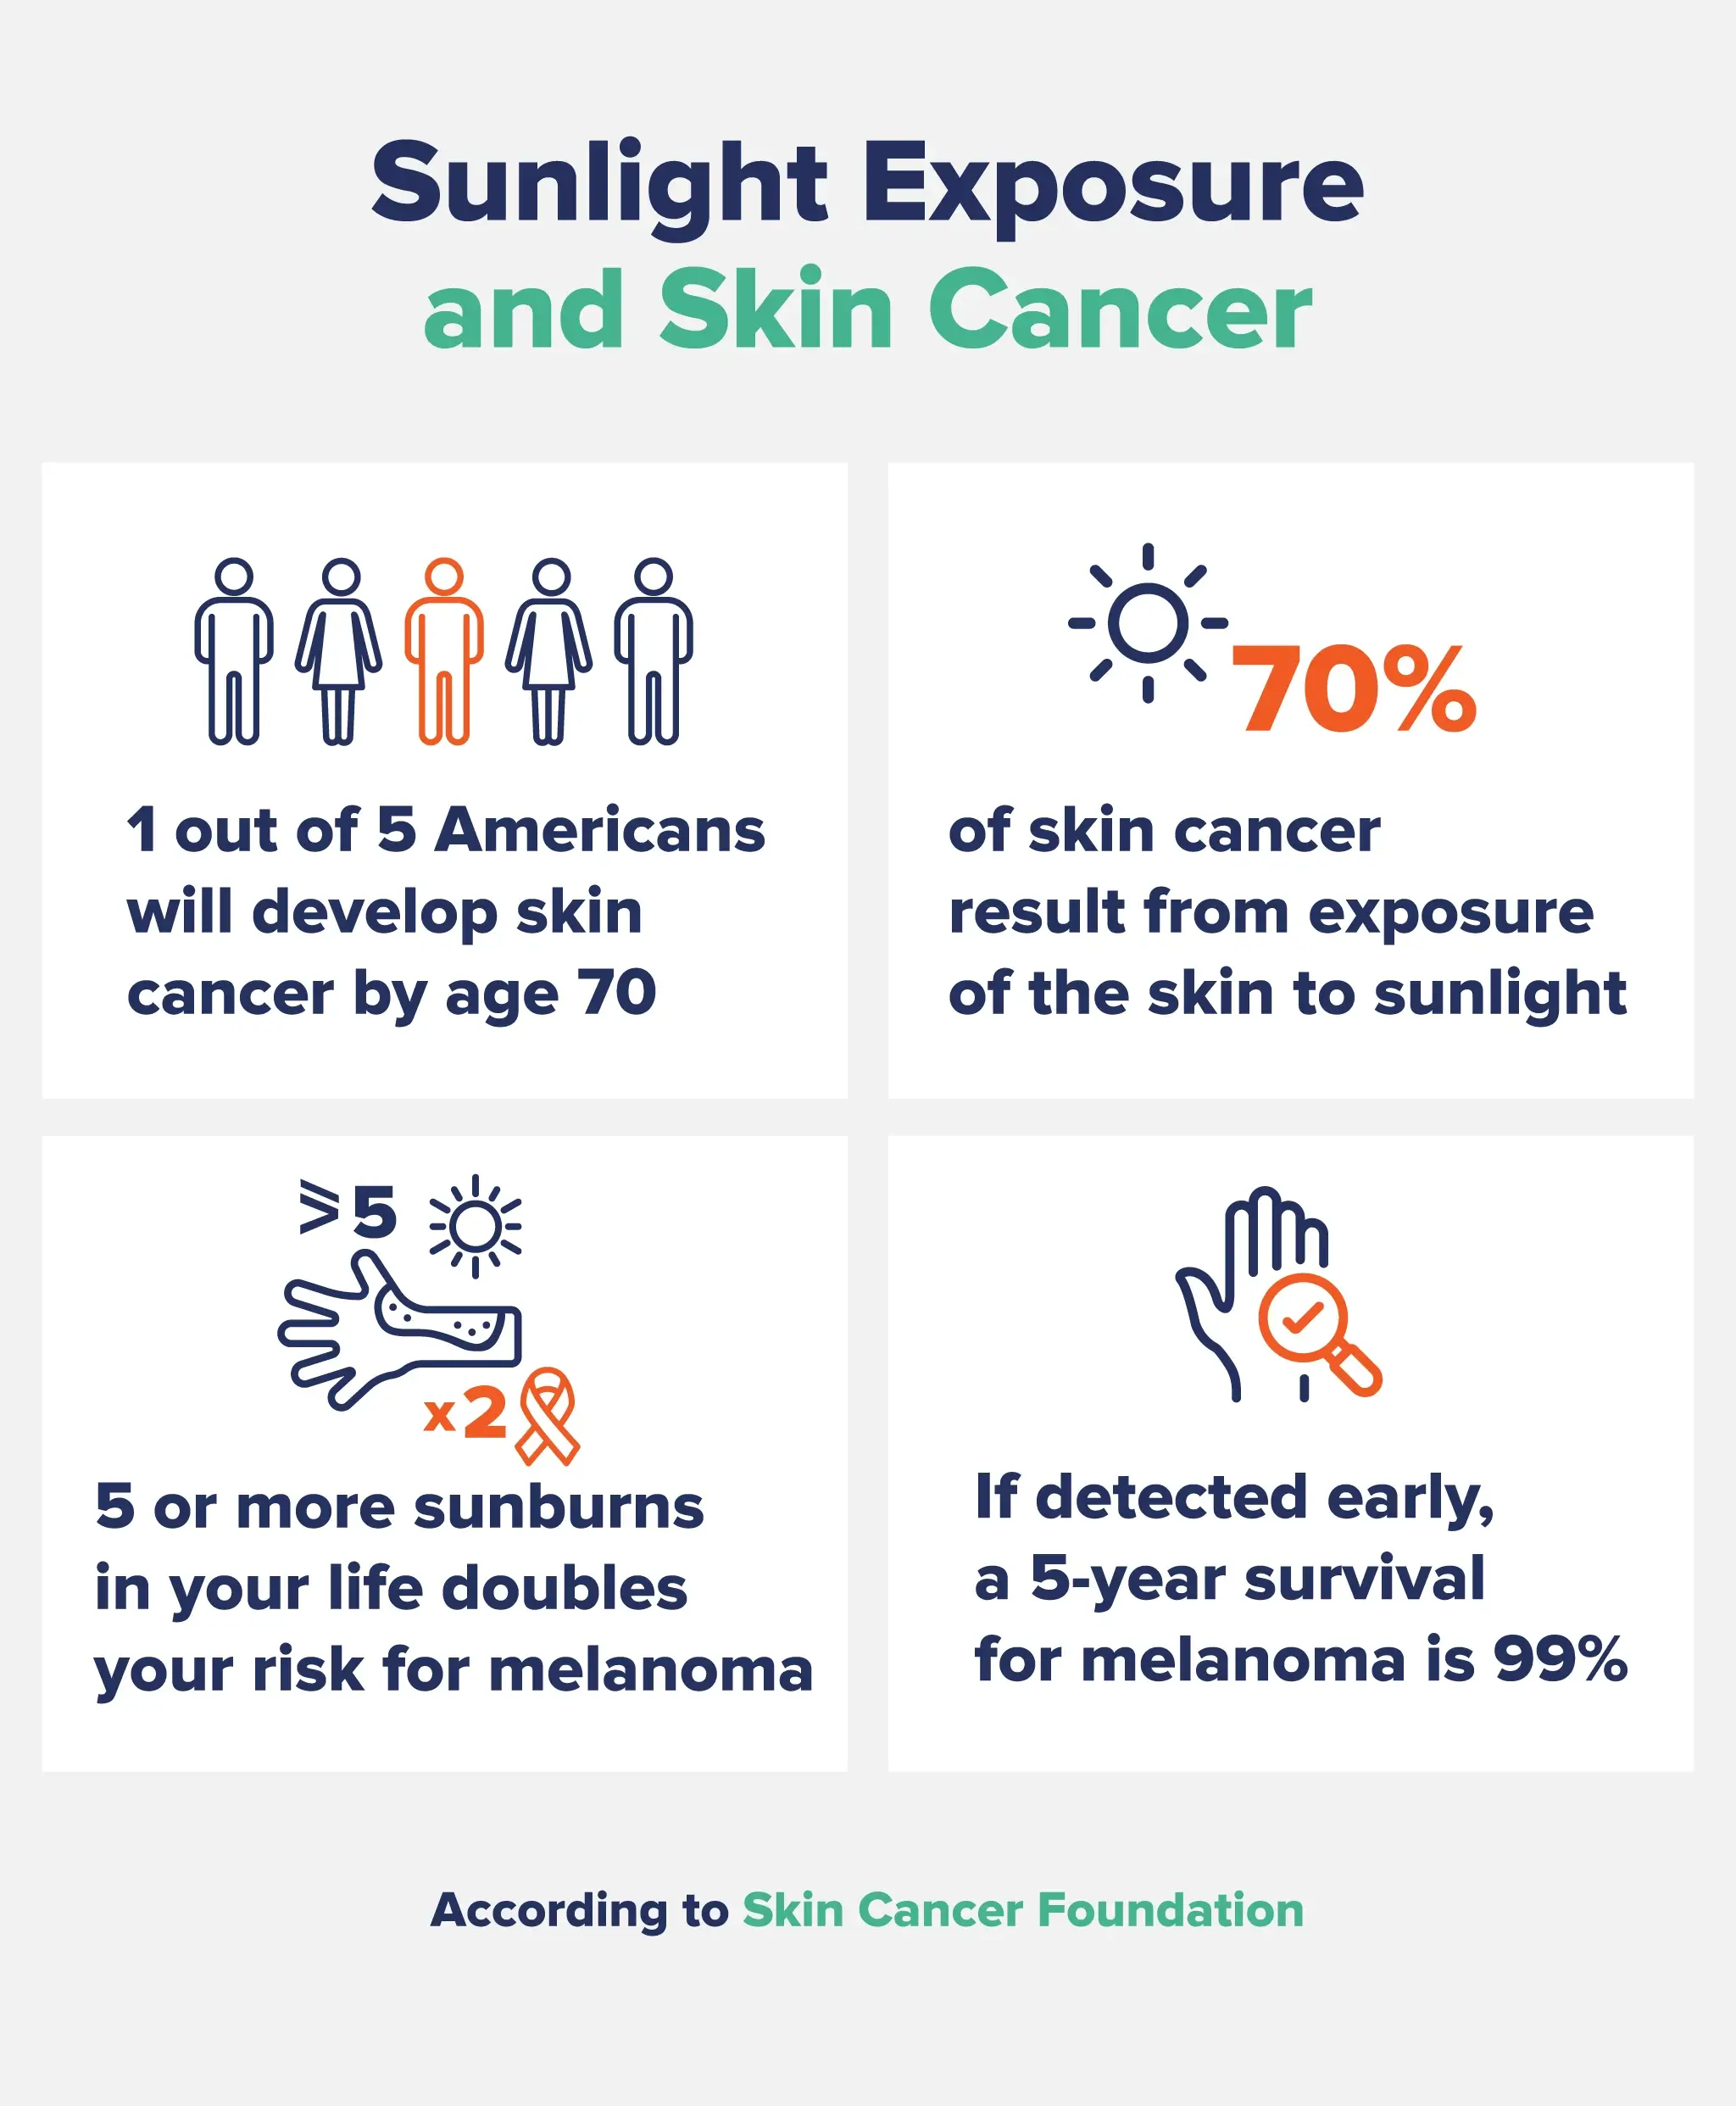 An infographic listing statistics about sunlight exposure and skin cancer.